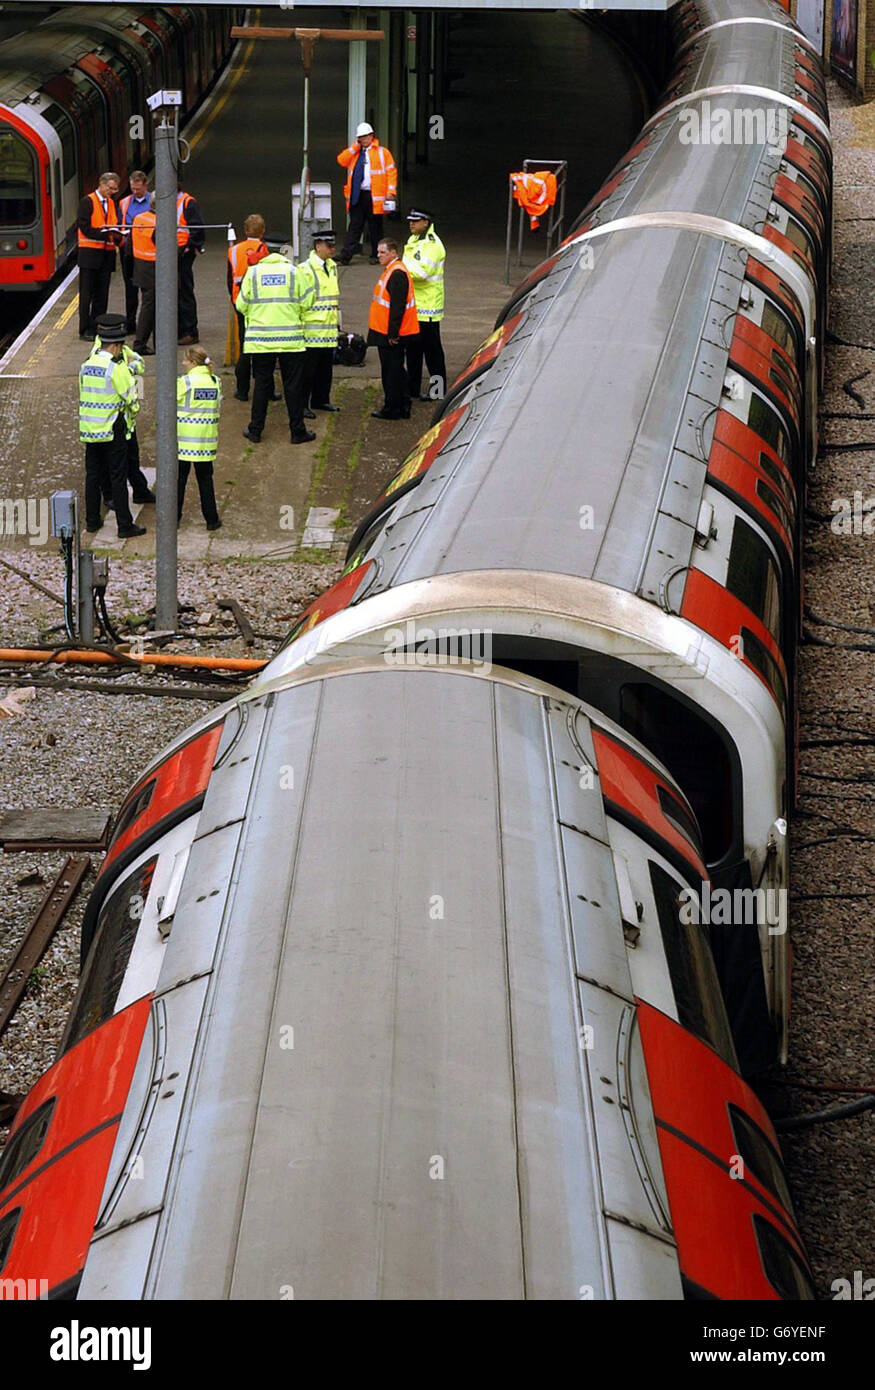 A derailed train at White City underground station in west London. None of the 150 passengers were hurt in the incident, which is the fourth derailment on the tube network in less than sixteen months. Stock Photo